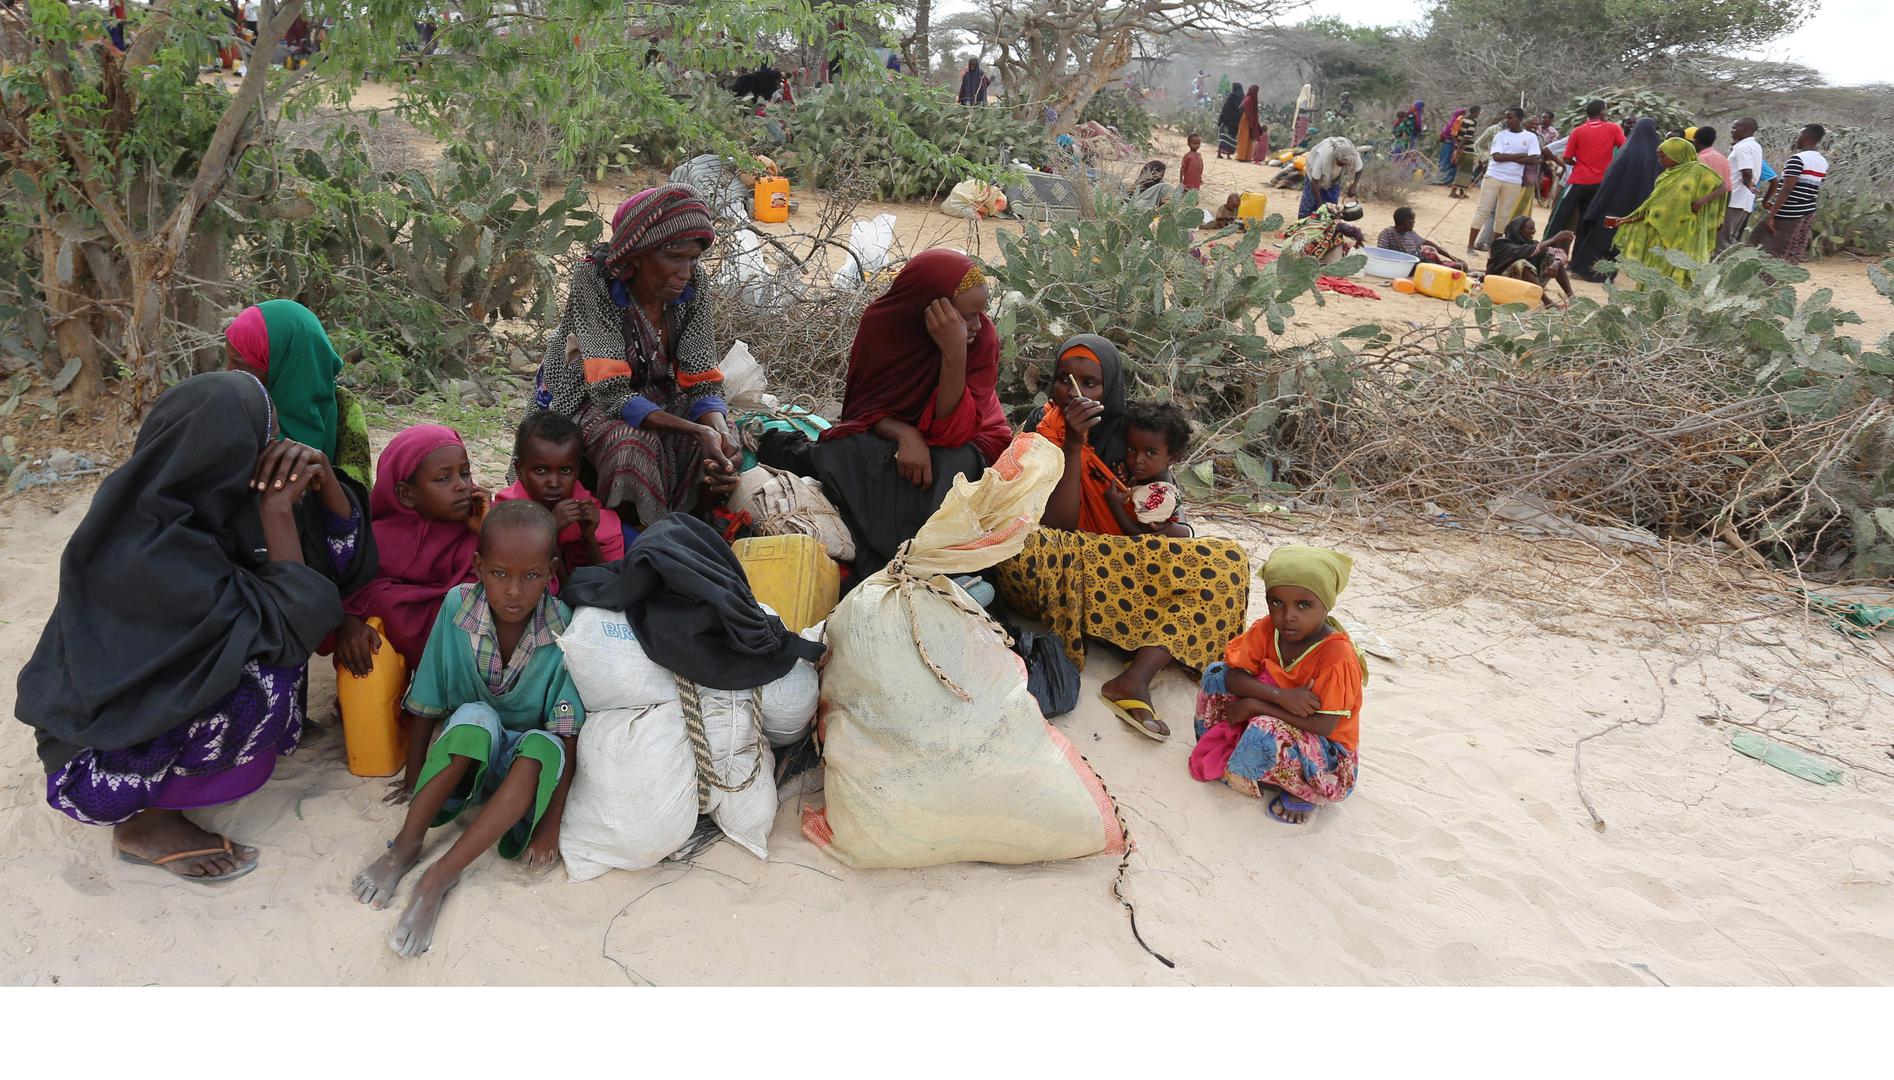 Somali families rest as they flee from drought-stricken Lower Shabelle region before entering makeshift camps in Somalia's capital, Mogadishu, joining the thousands already displaced, March 17, 2017. Al-Shabab forces attacked villages in Lower Shabelle re